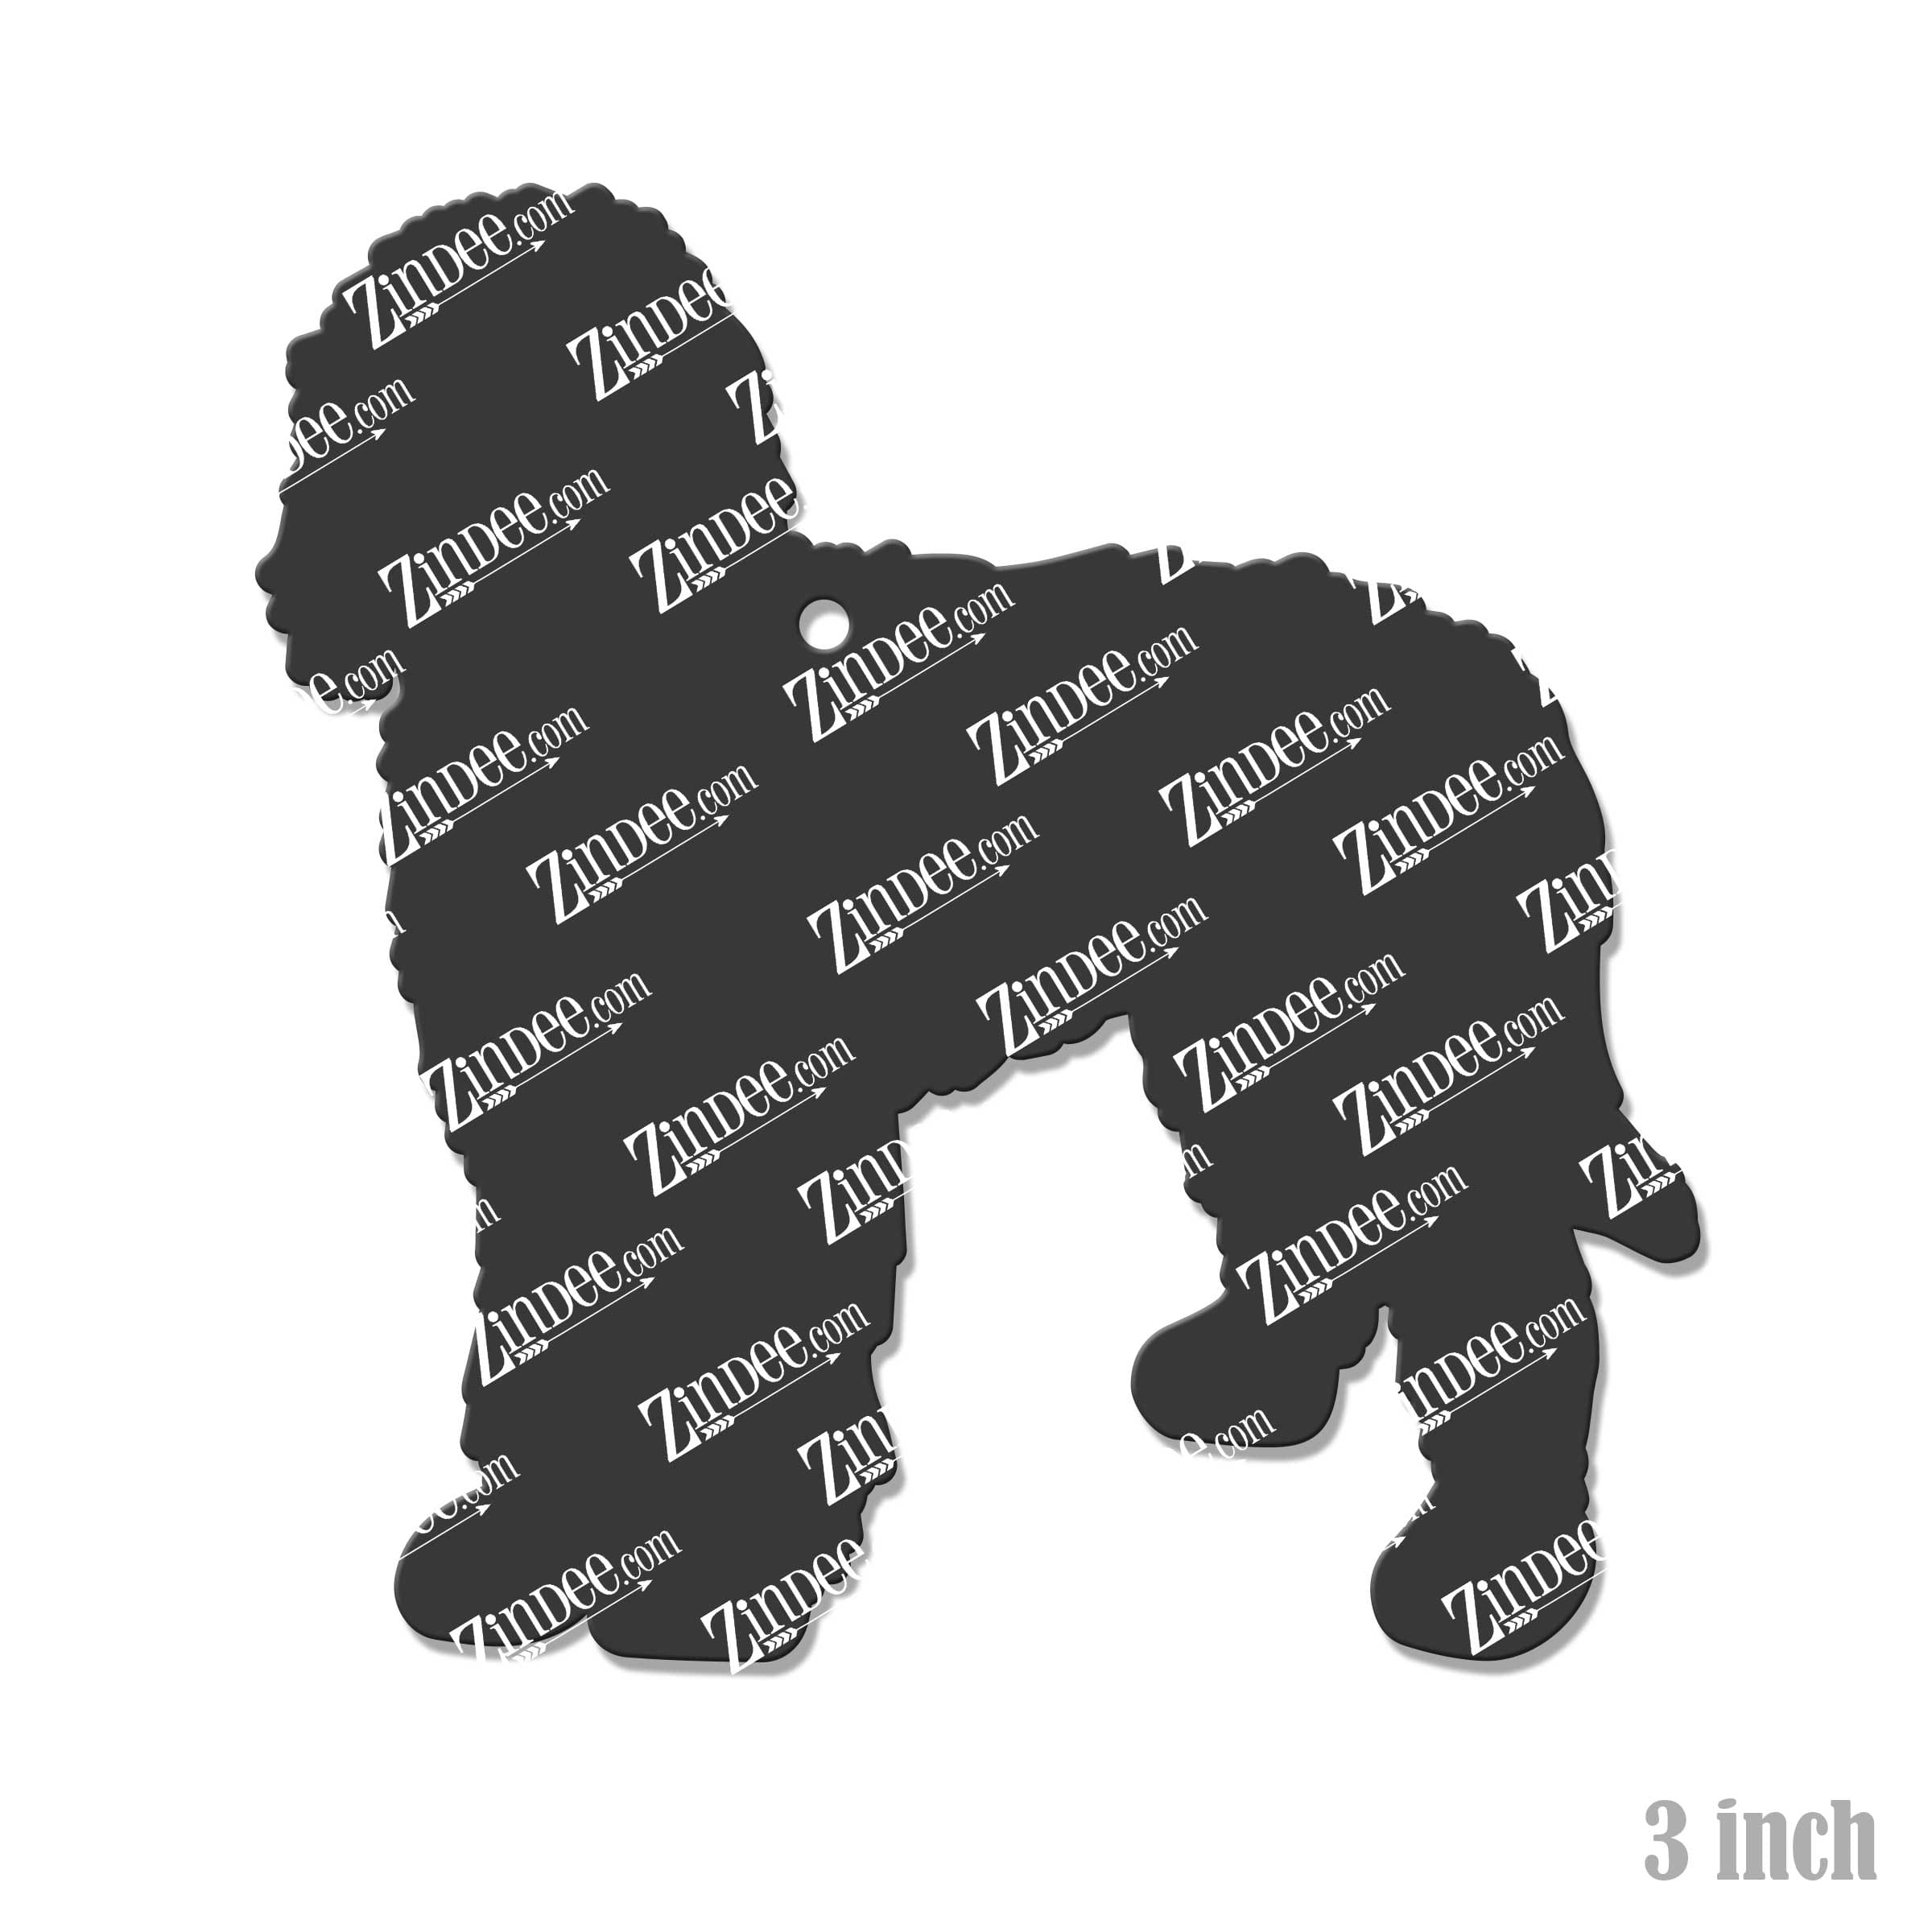 Golden Doodle acrylic blank (3 inch) – Acrylic Blanks, Stickers, Printed  Vinyl, Glitter and more!